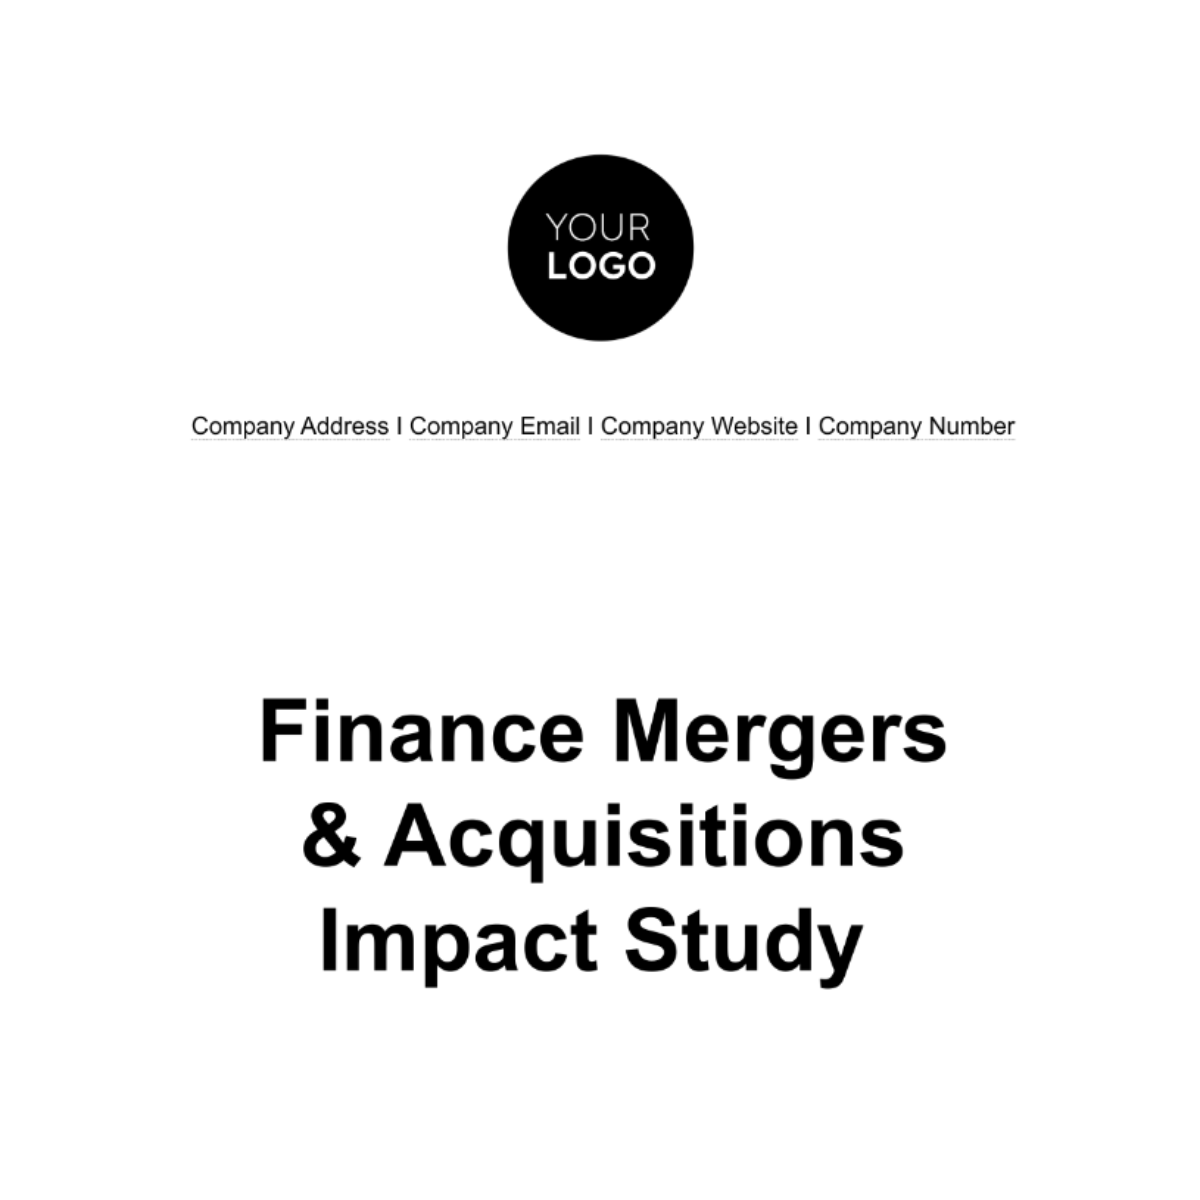 Finance Mergers & Acquisitions Impact Study Template